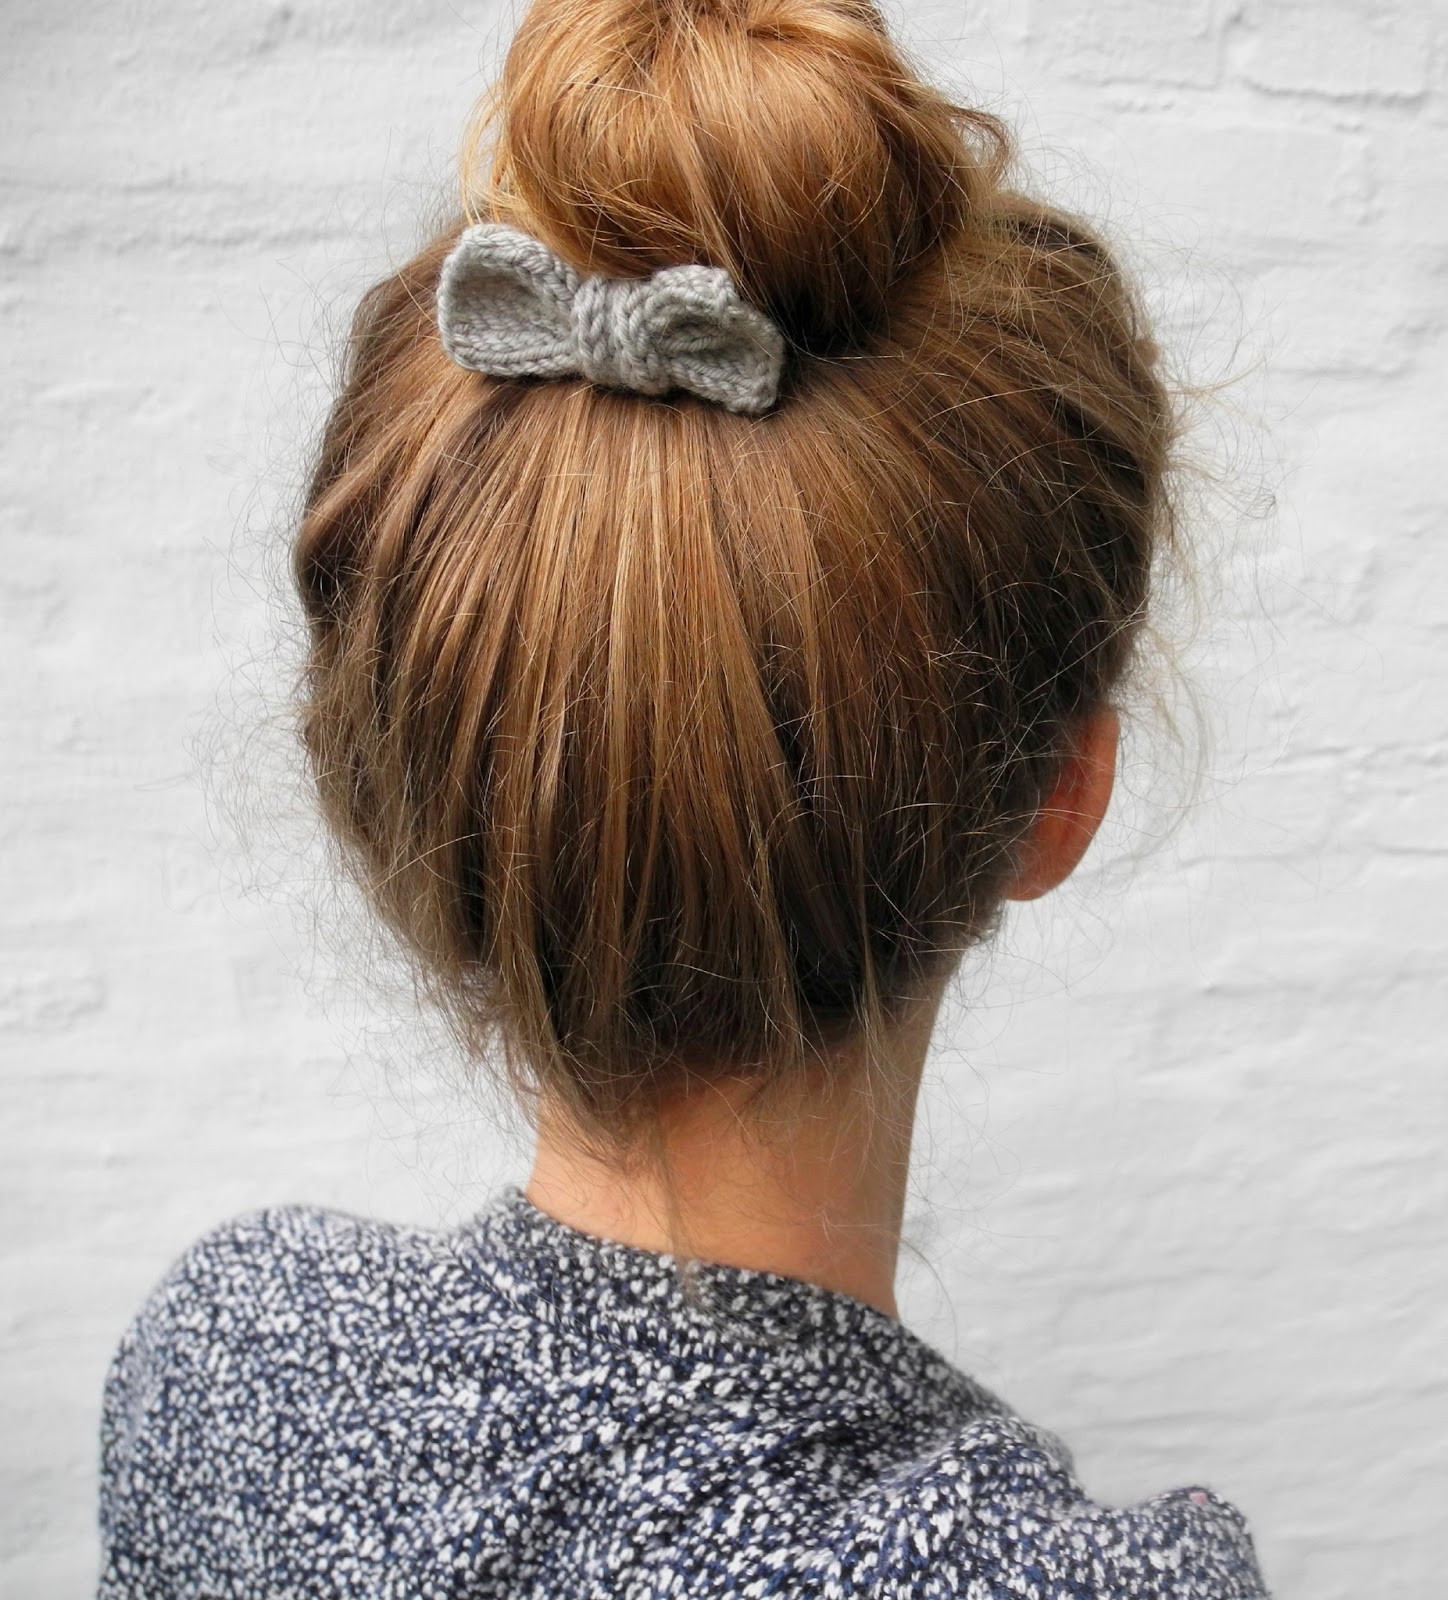 Best ideas about DIY Hair Accessory
. Save or Pin 25 DIY Hair Accessories to Make Now Now.